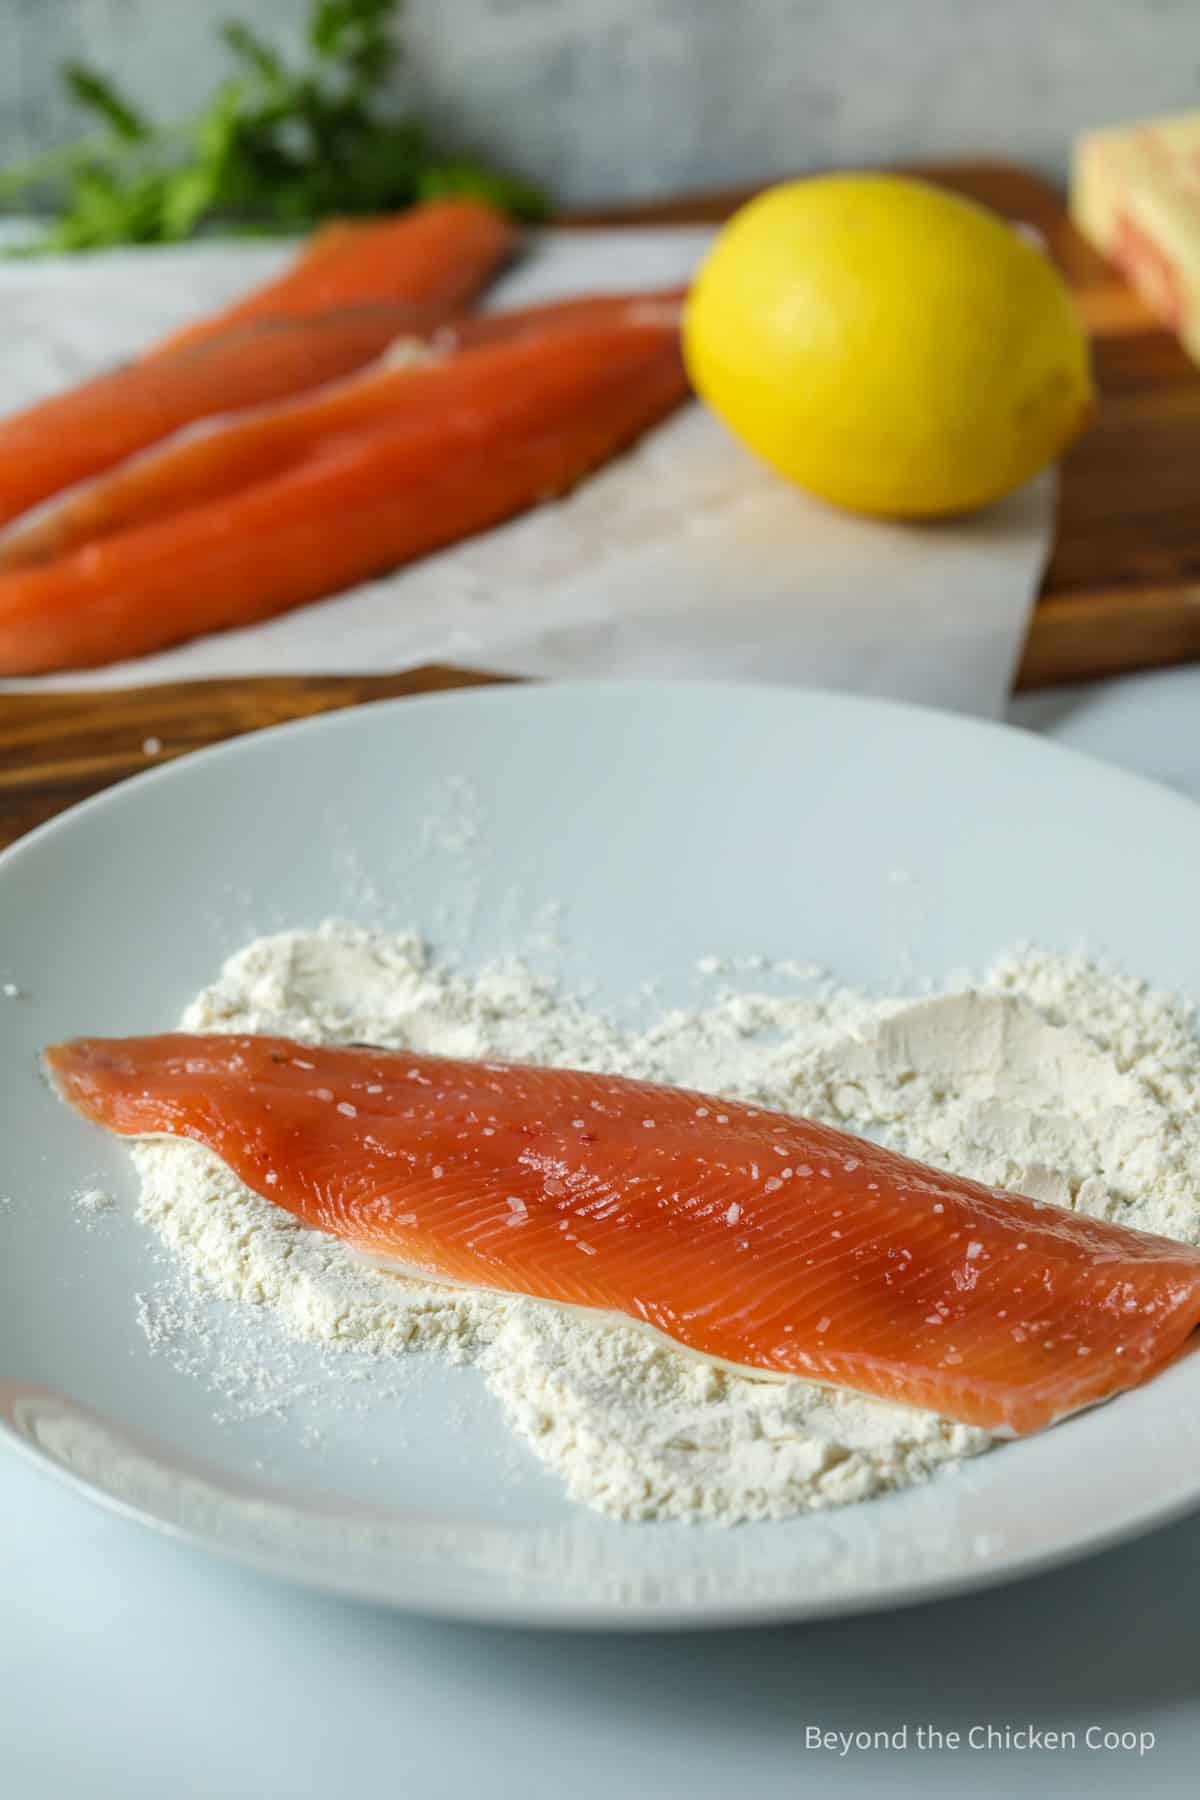 Trout in a pile of flour on a plate.